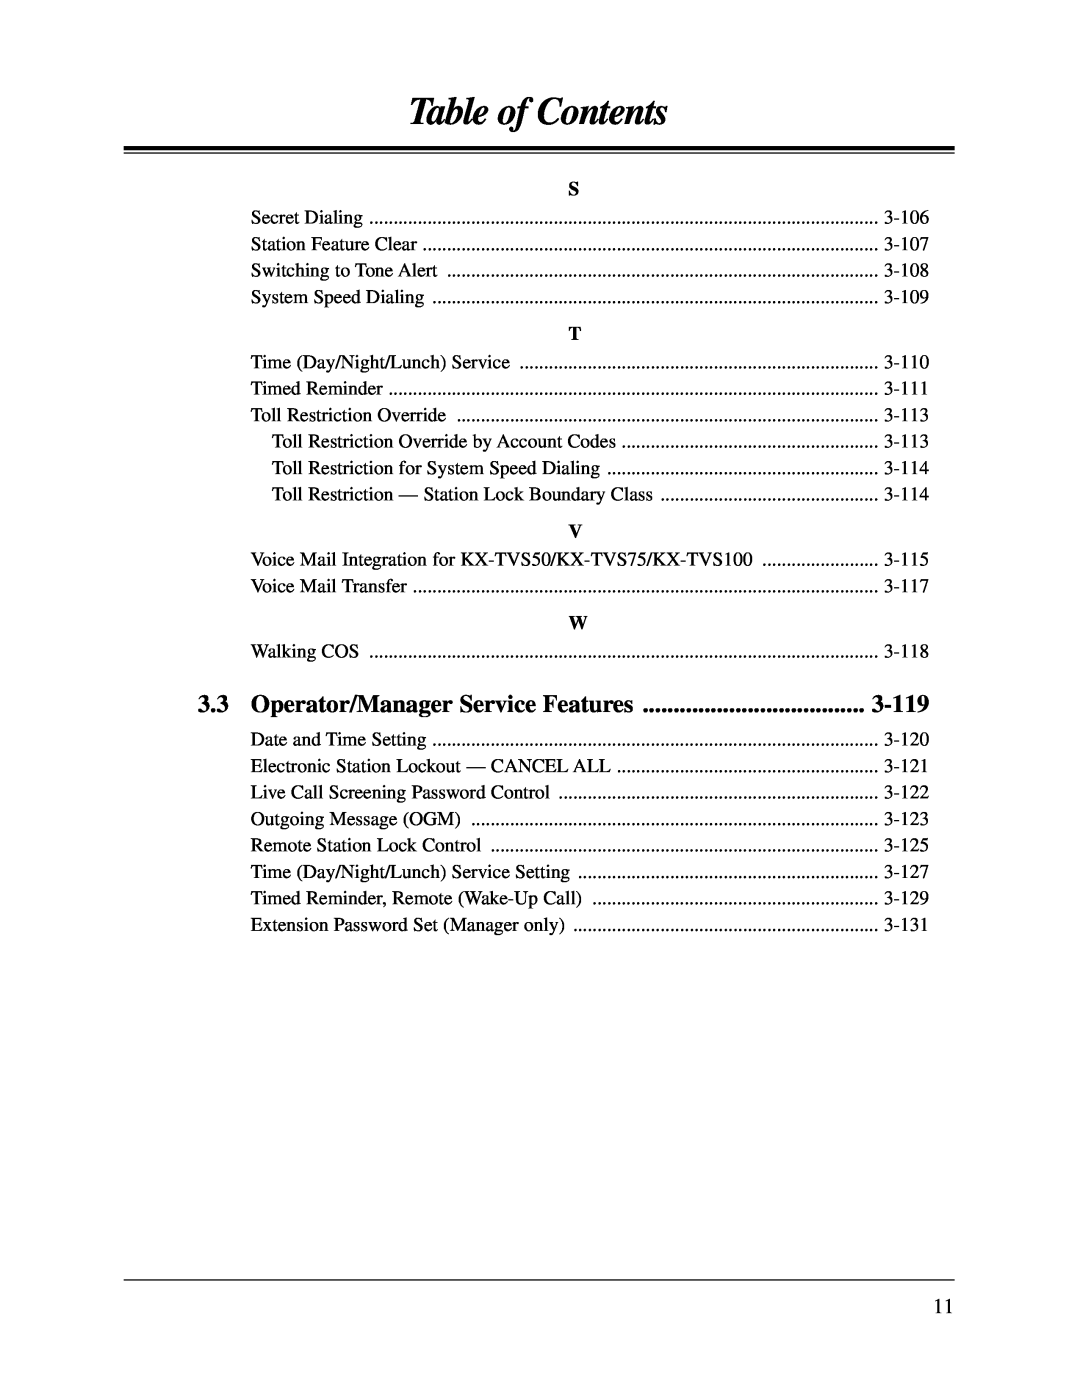 Panasonic KX-TA624 user manual Operator/Manager Service Features, 3-119, Table of Contents 